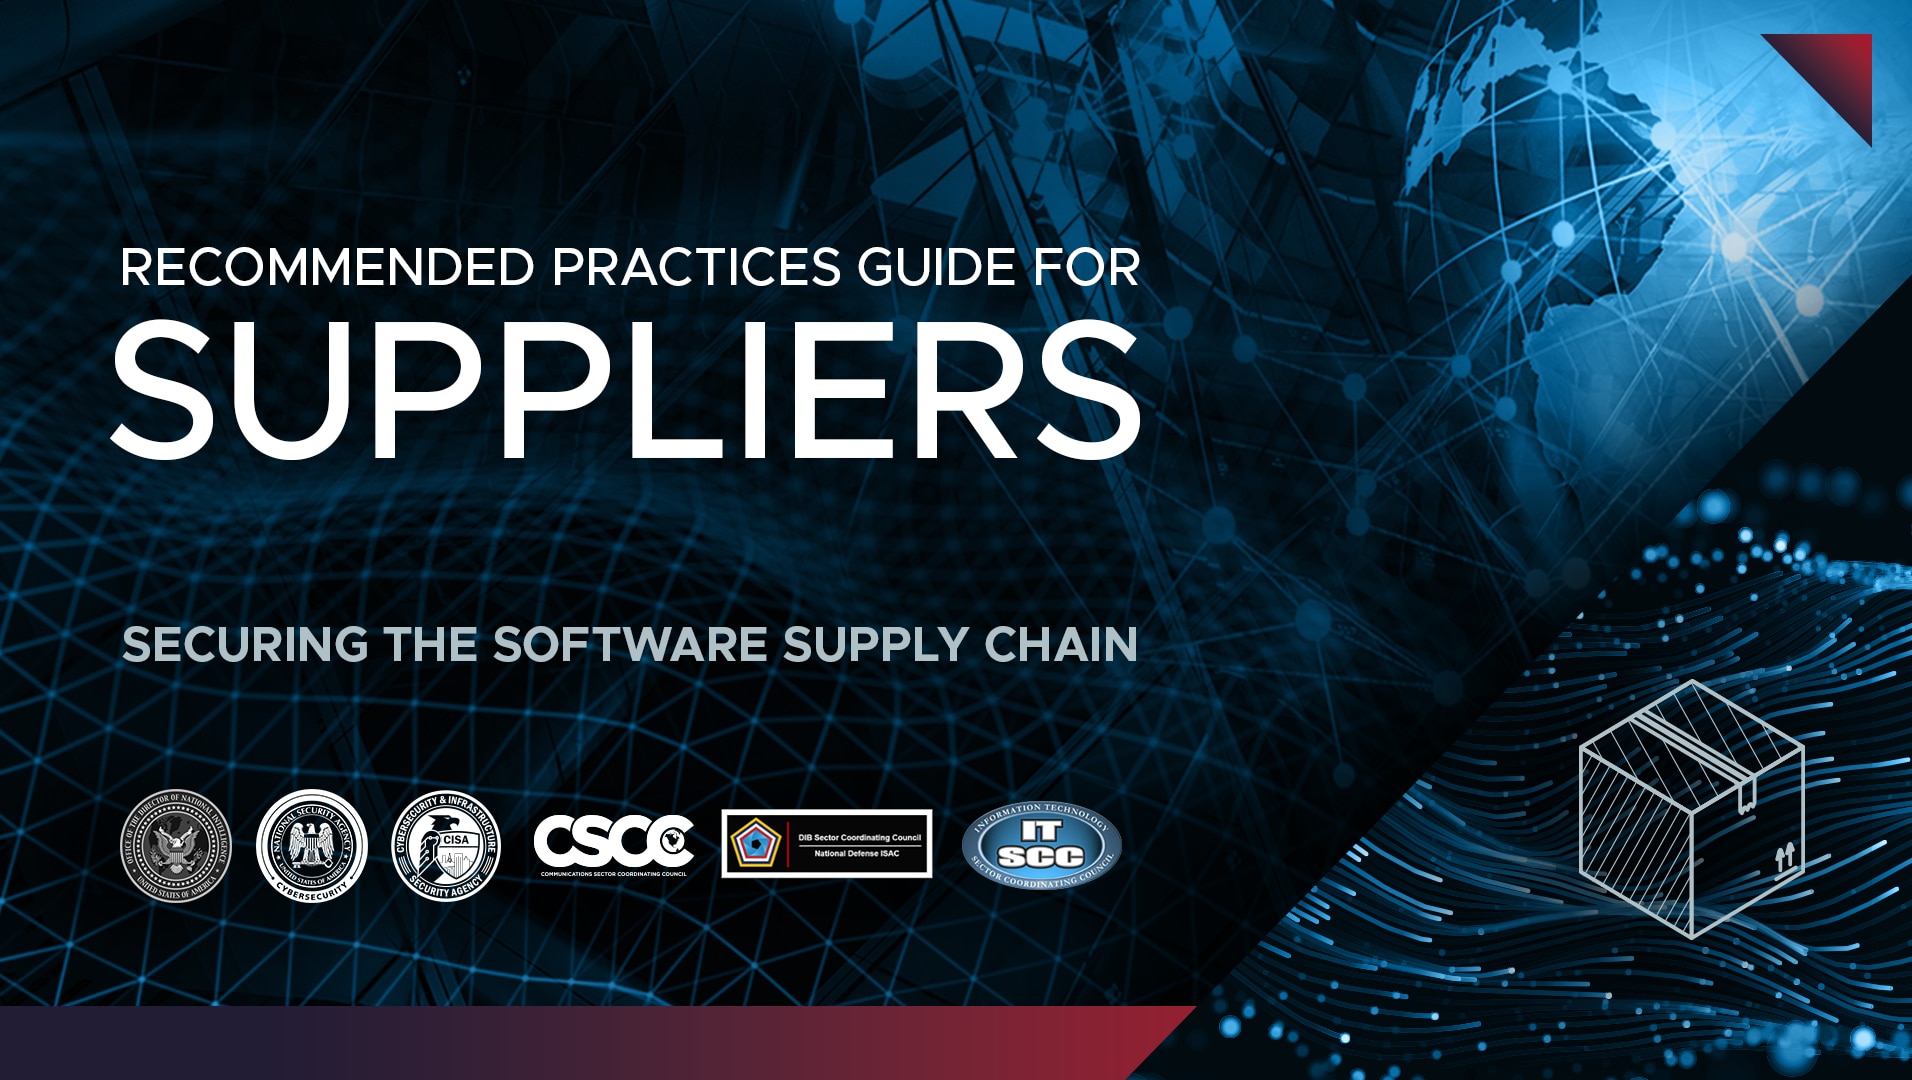 Securing the Software Supply Chain: Recommended Practices Guide for Suppliers.